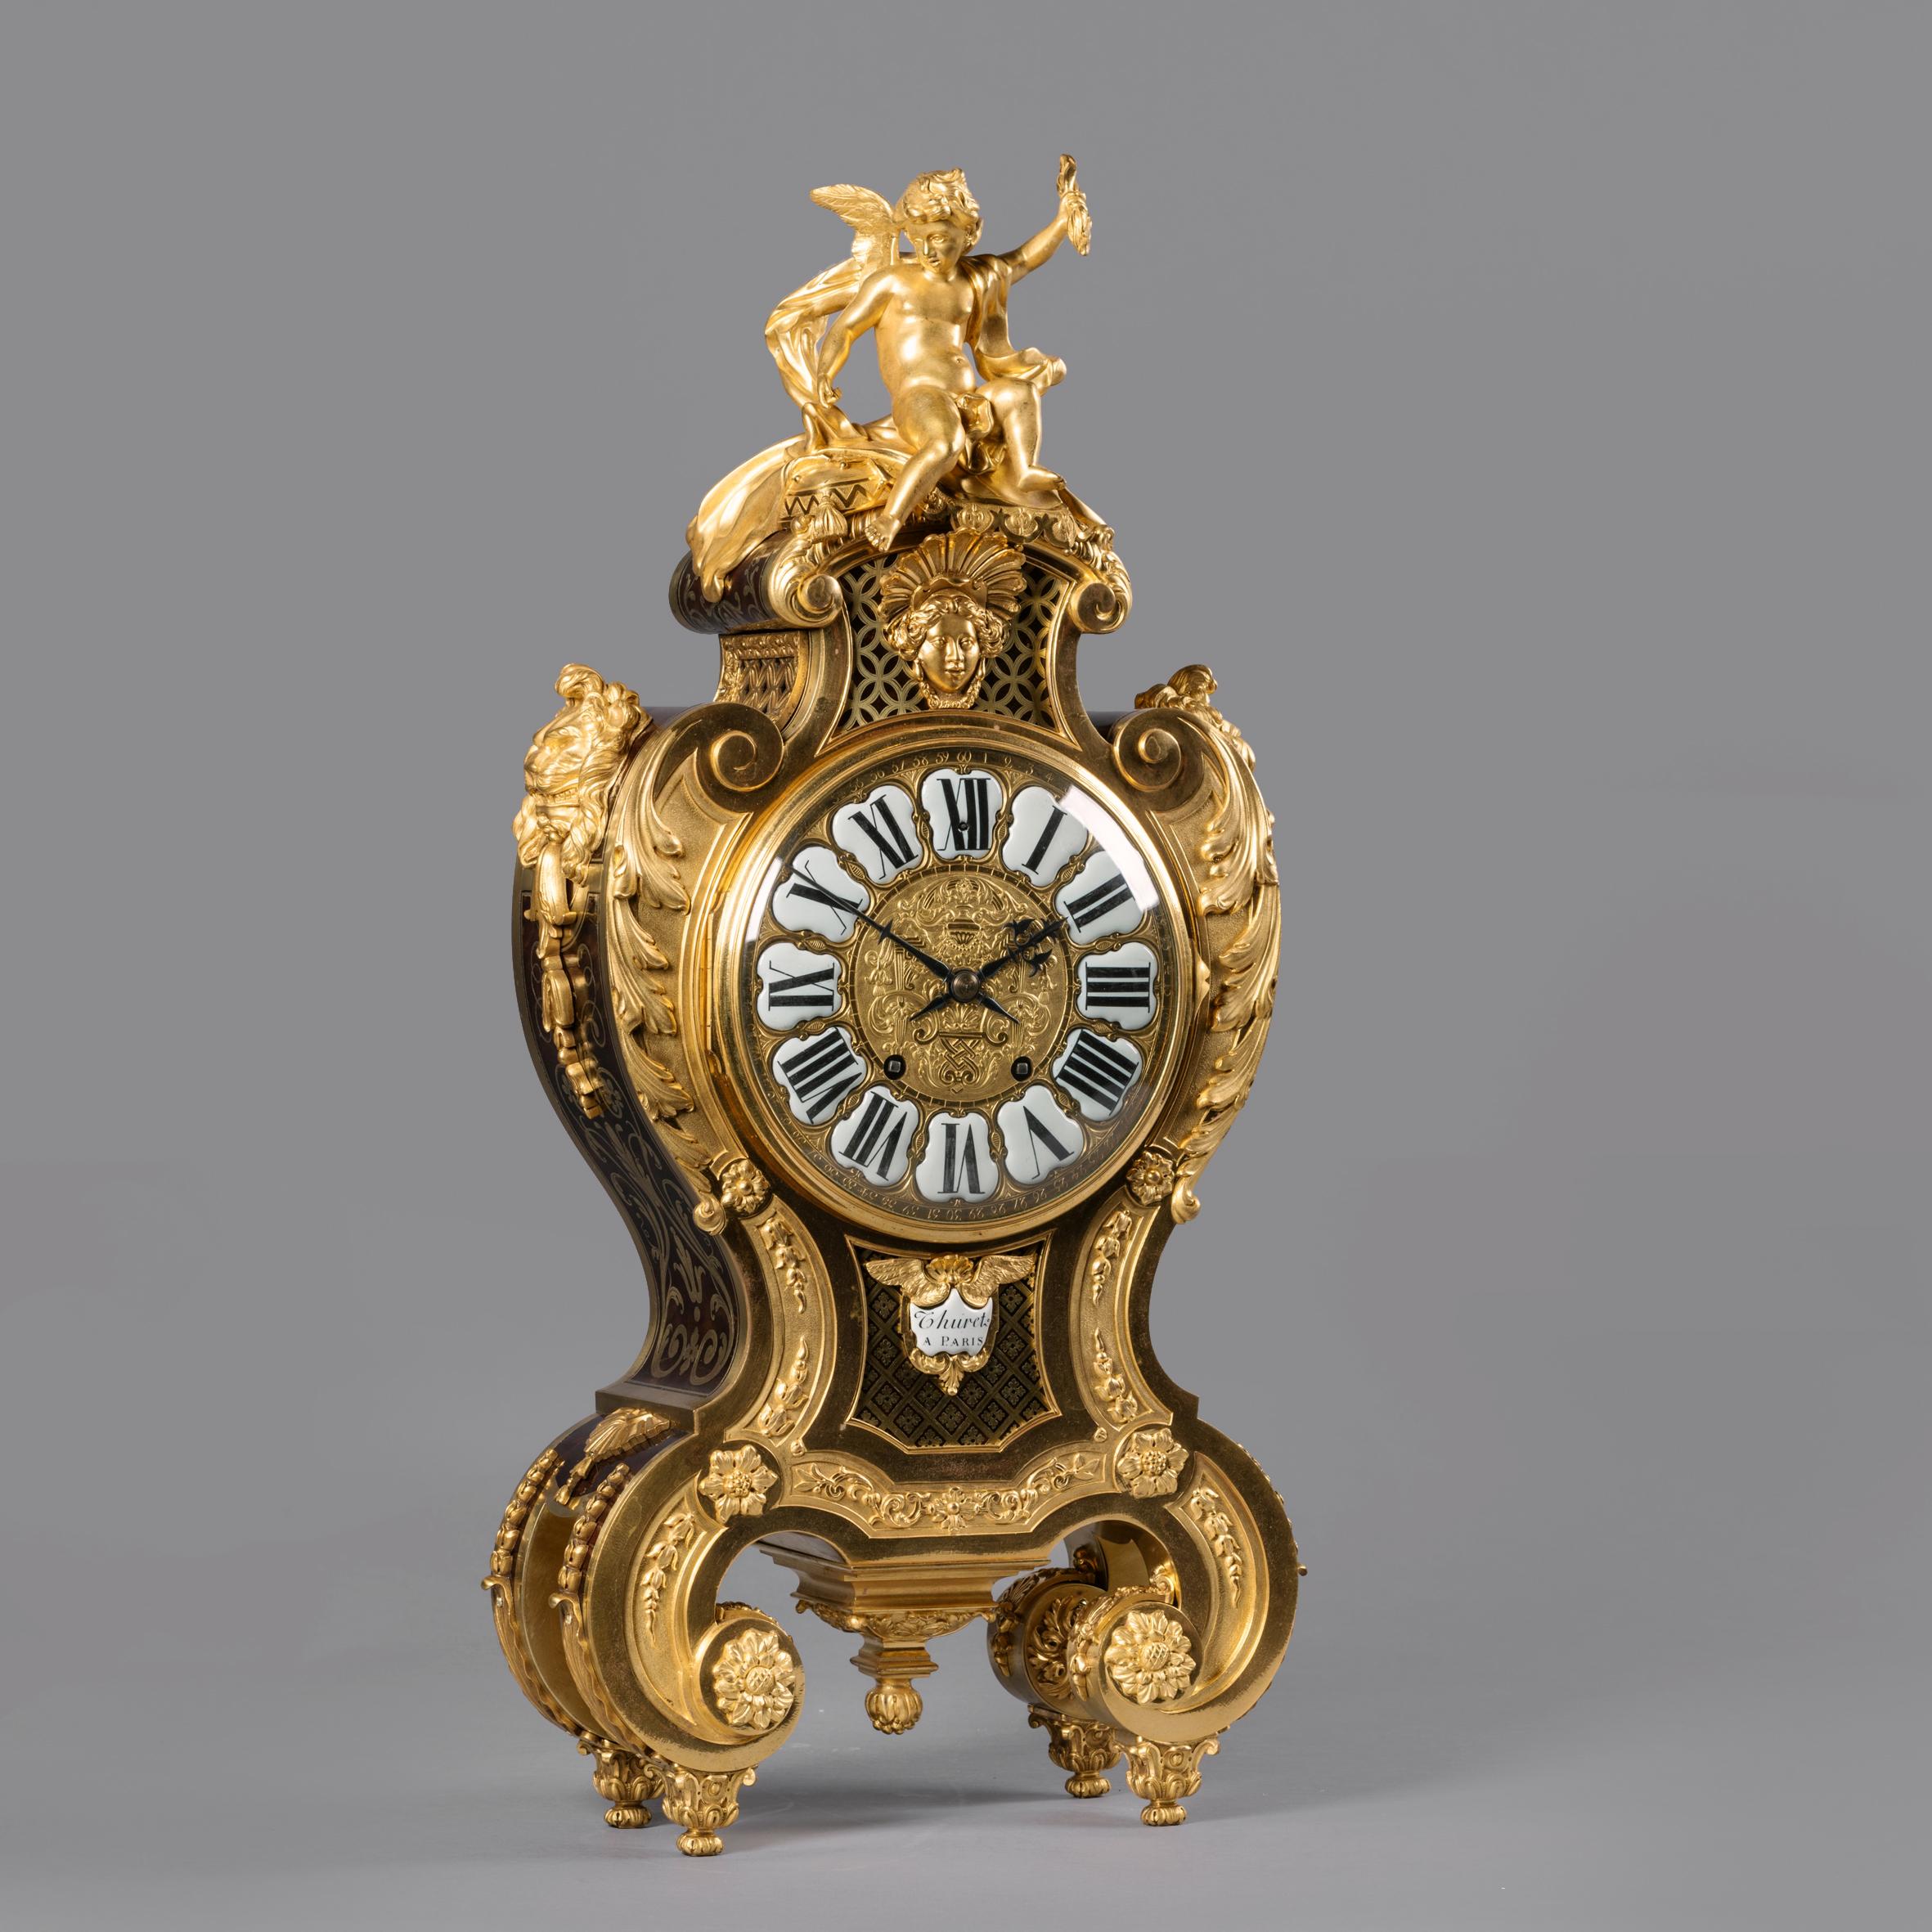 A Regence Style Gilt-Bronze and Boulle Marquetry Inlaid Grand Cartel de Applique, In the Manner of André-Charles Boulle.

The eight-day twin-train movement, striking on a bell.  

The dial with a porcelain cartouche inscribed ‘Thuret a Paris’.
The